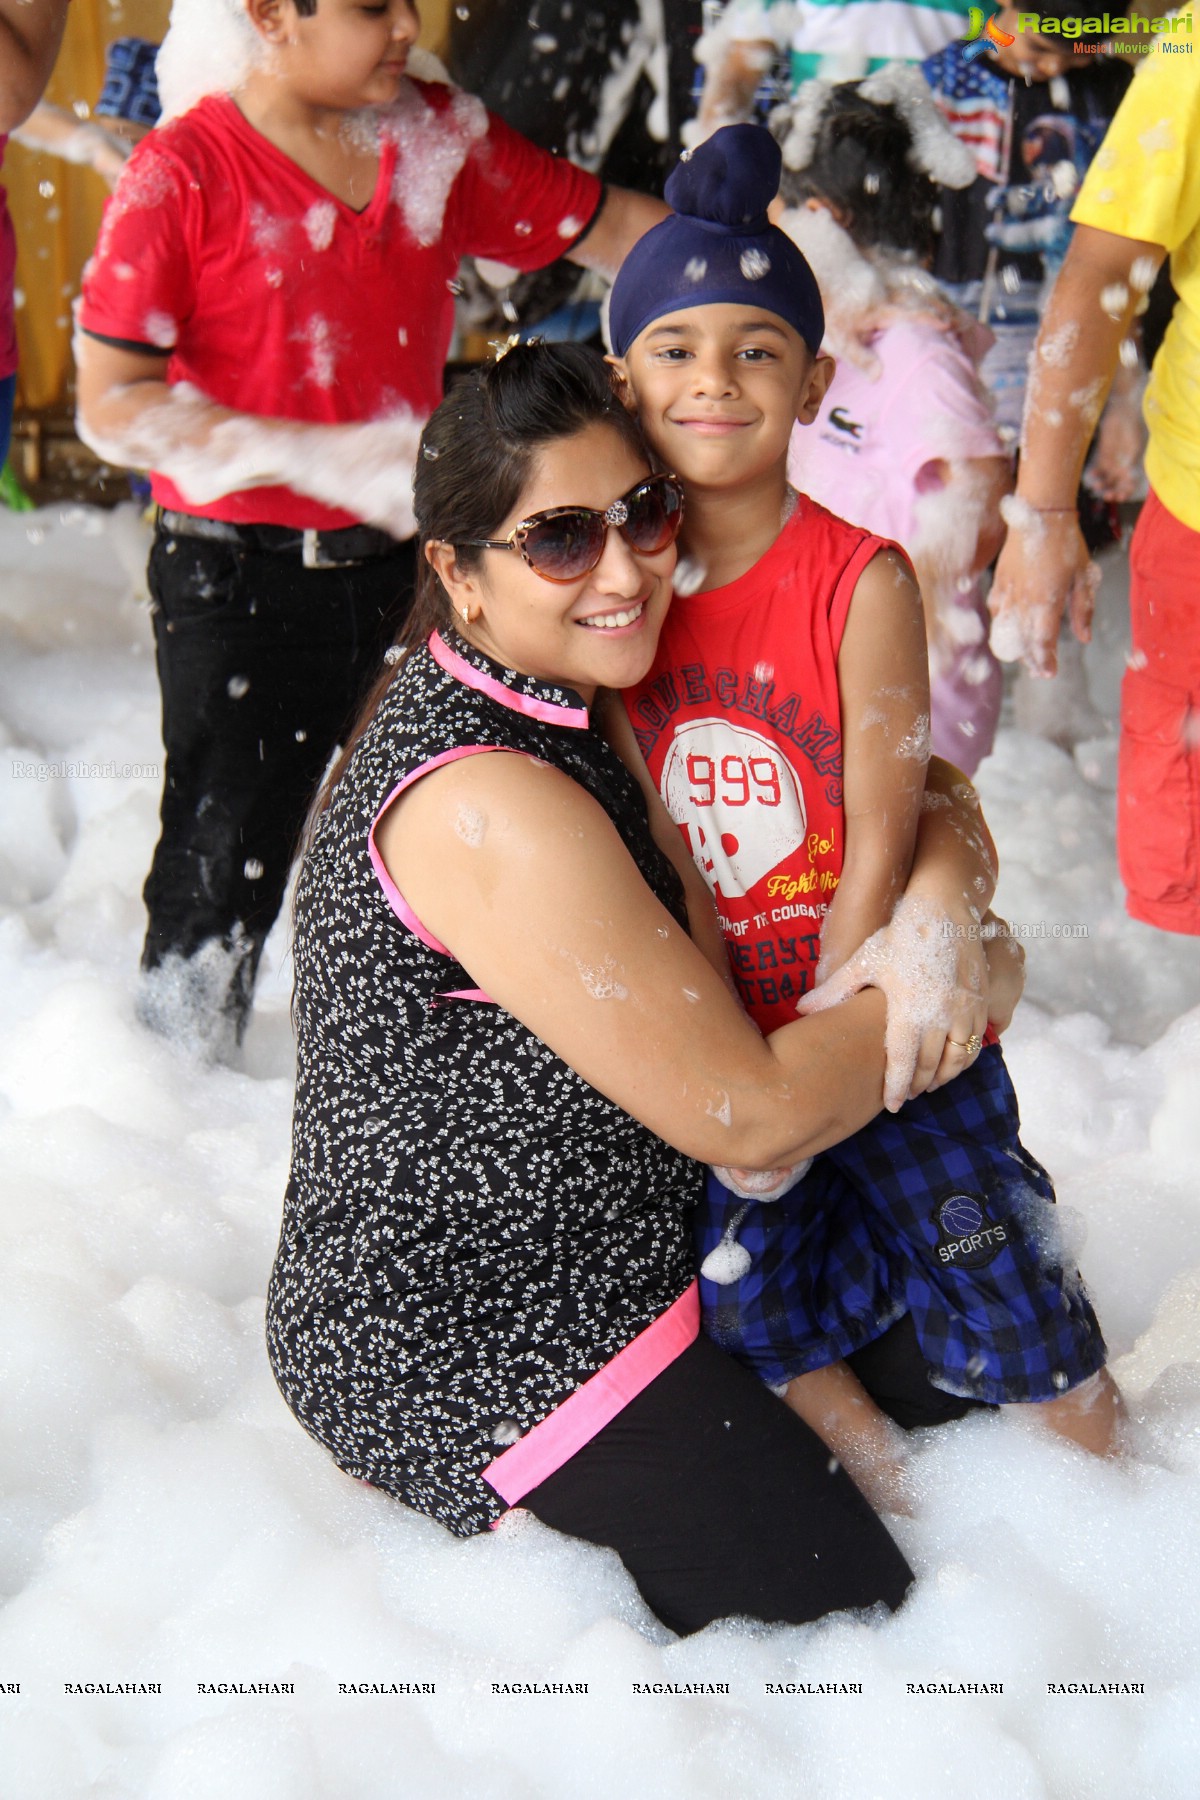 Mommy n Me Event at Begumpet Palace, Hyderabad